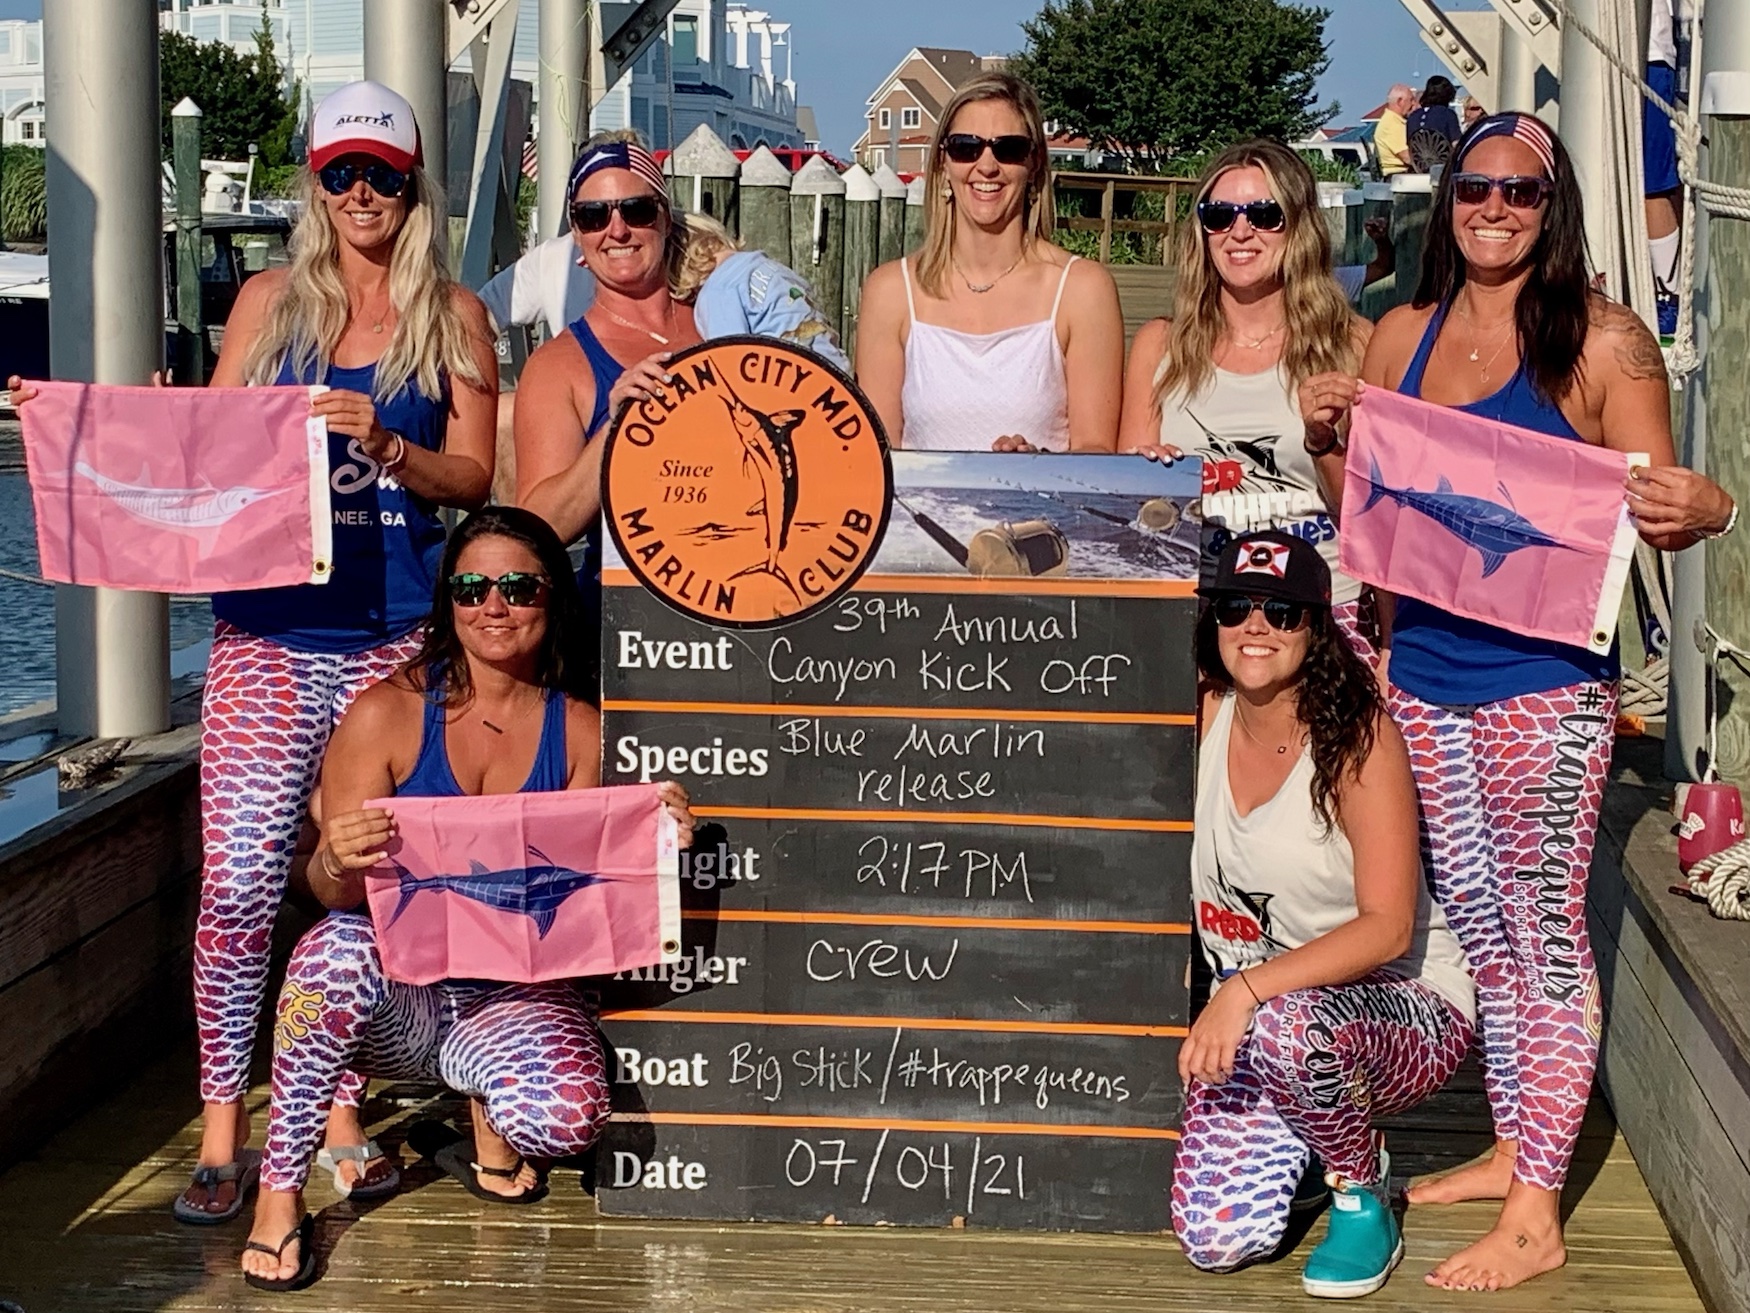 Ladies of the Big Stick Win 39th Annual OCMC Canyon Kick-Off